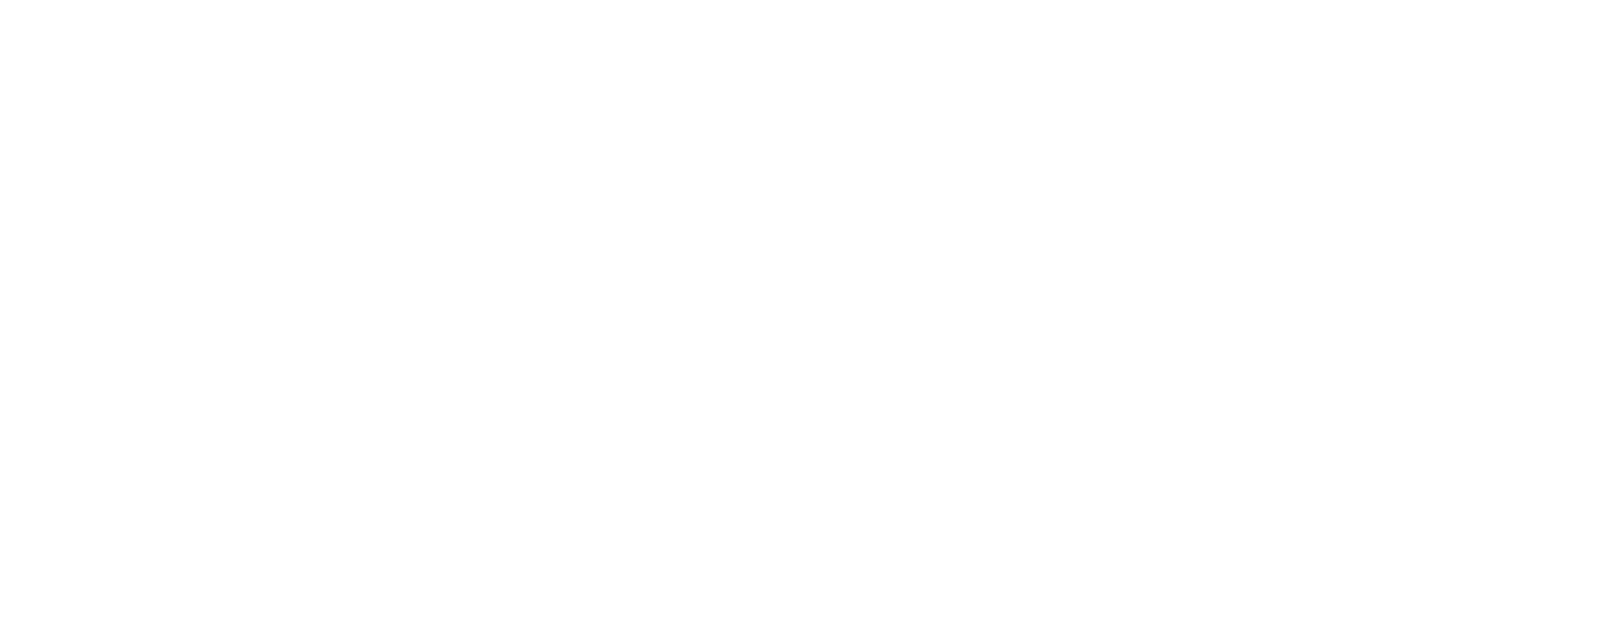 For the SUSTAINABLE FUTURE